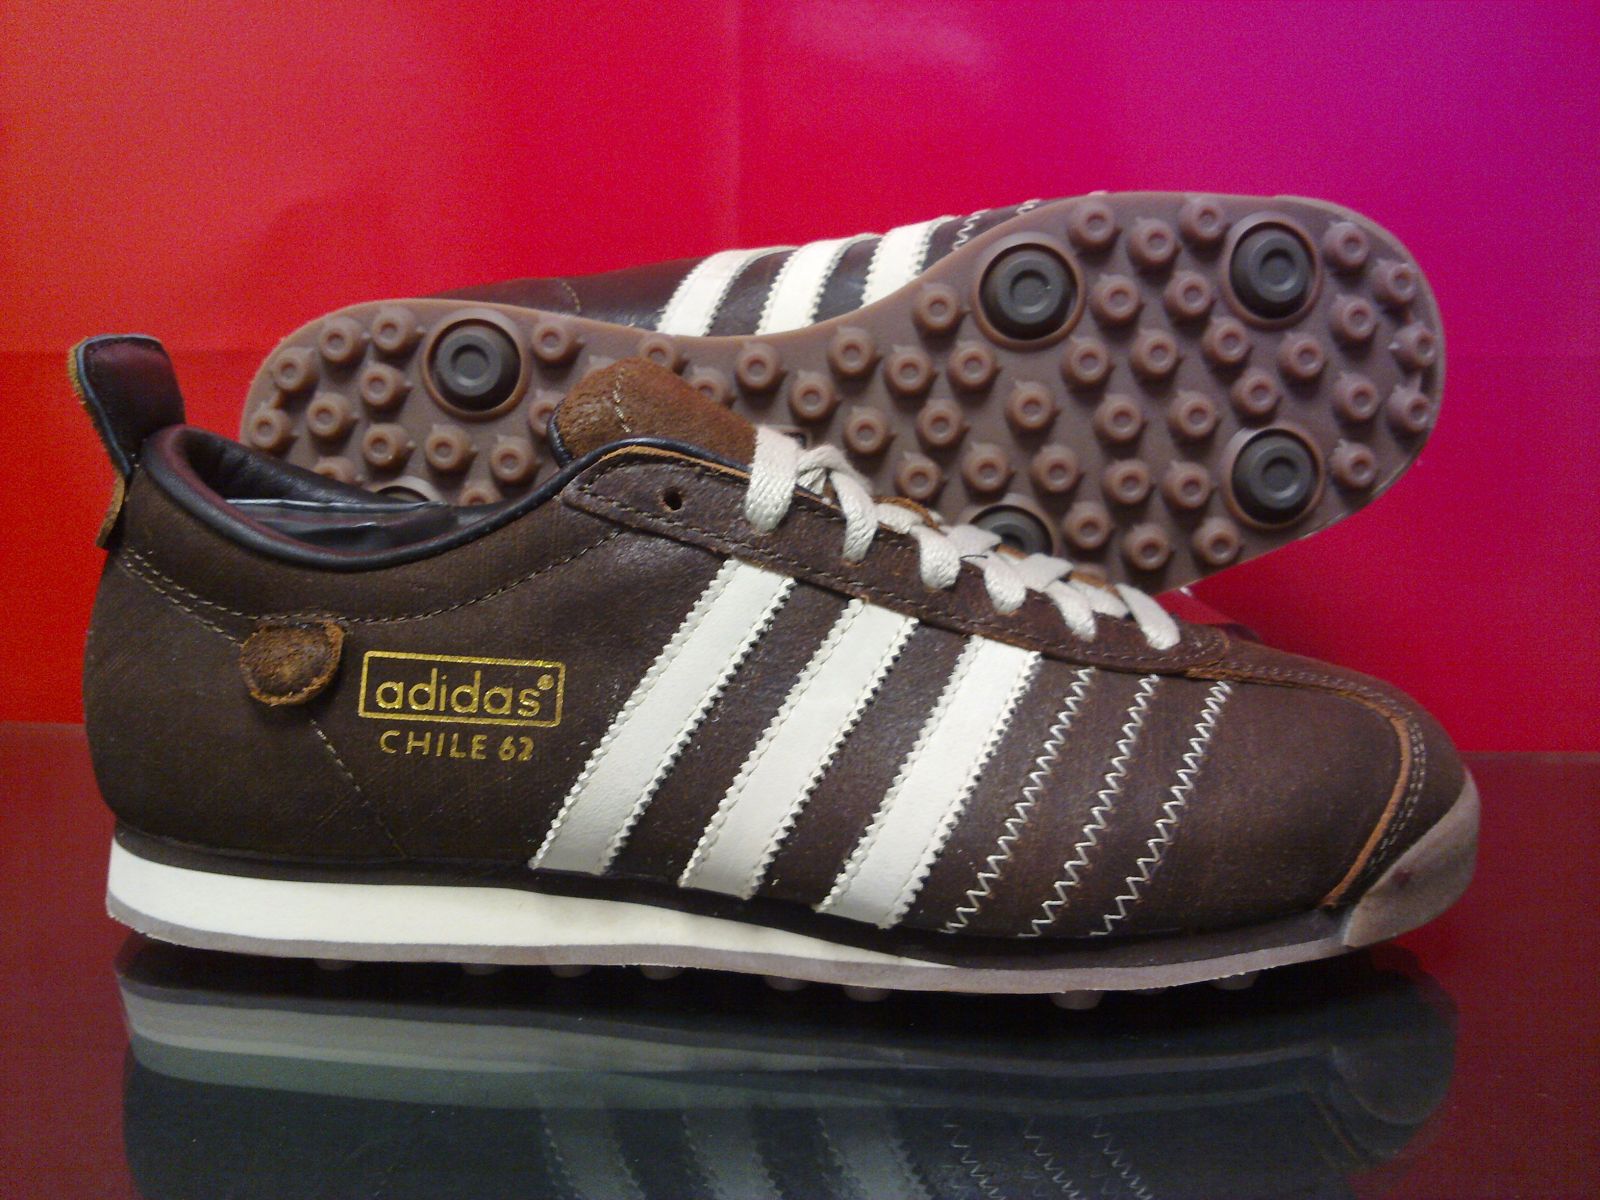 SALE Adidas CHILE 62 Brown Leather Trainers UK 6 To 11 | eBay